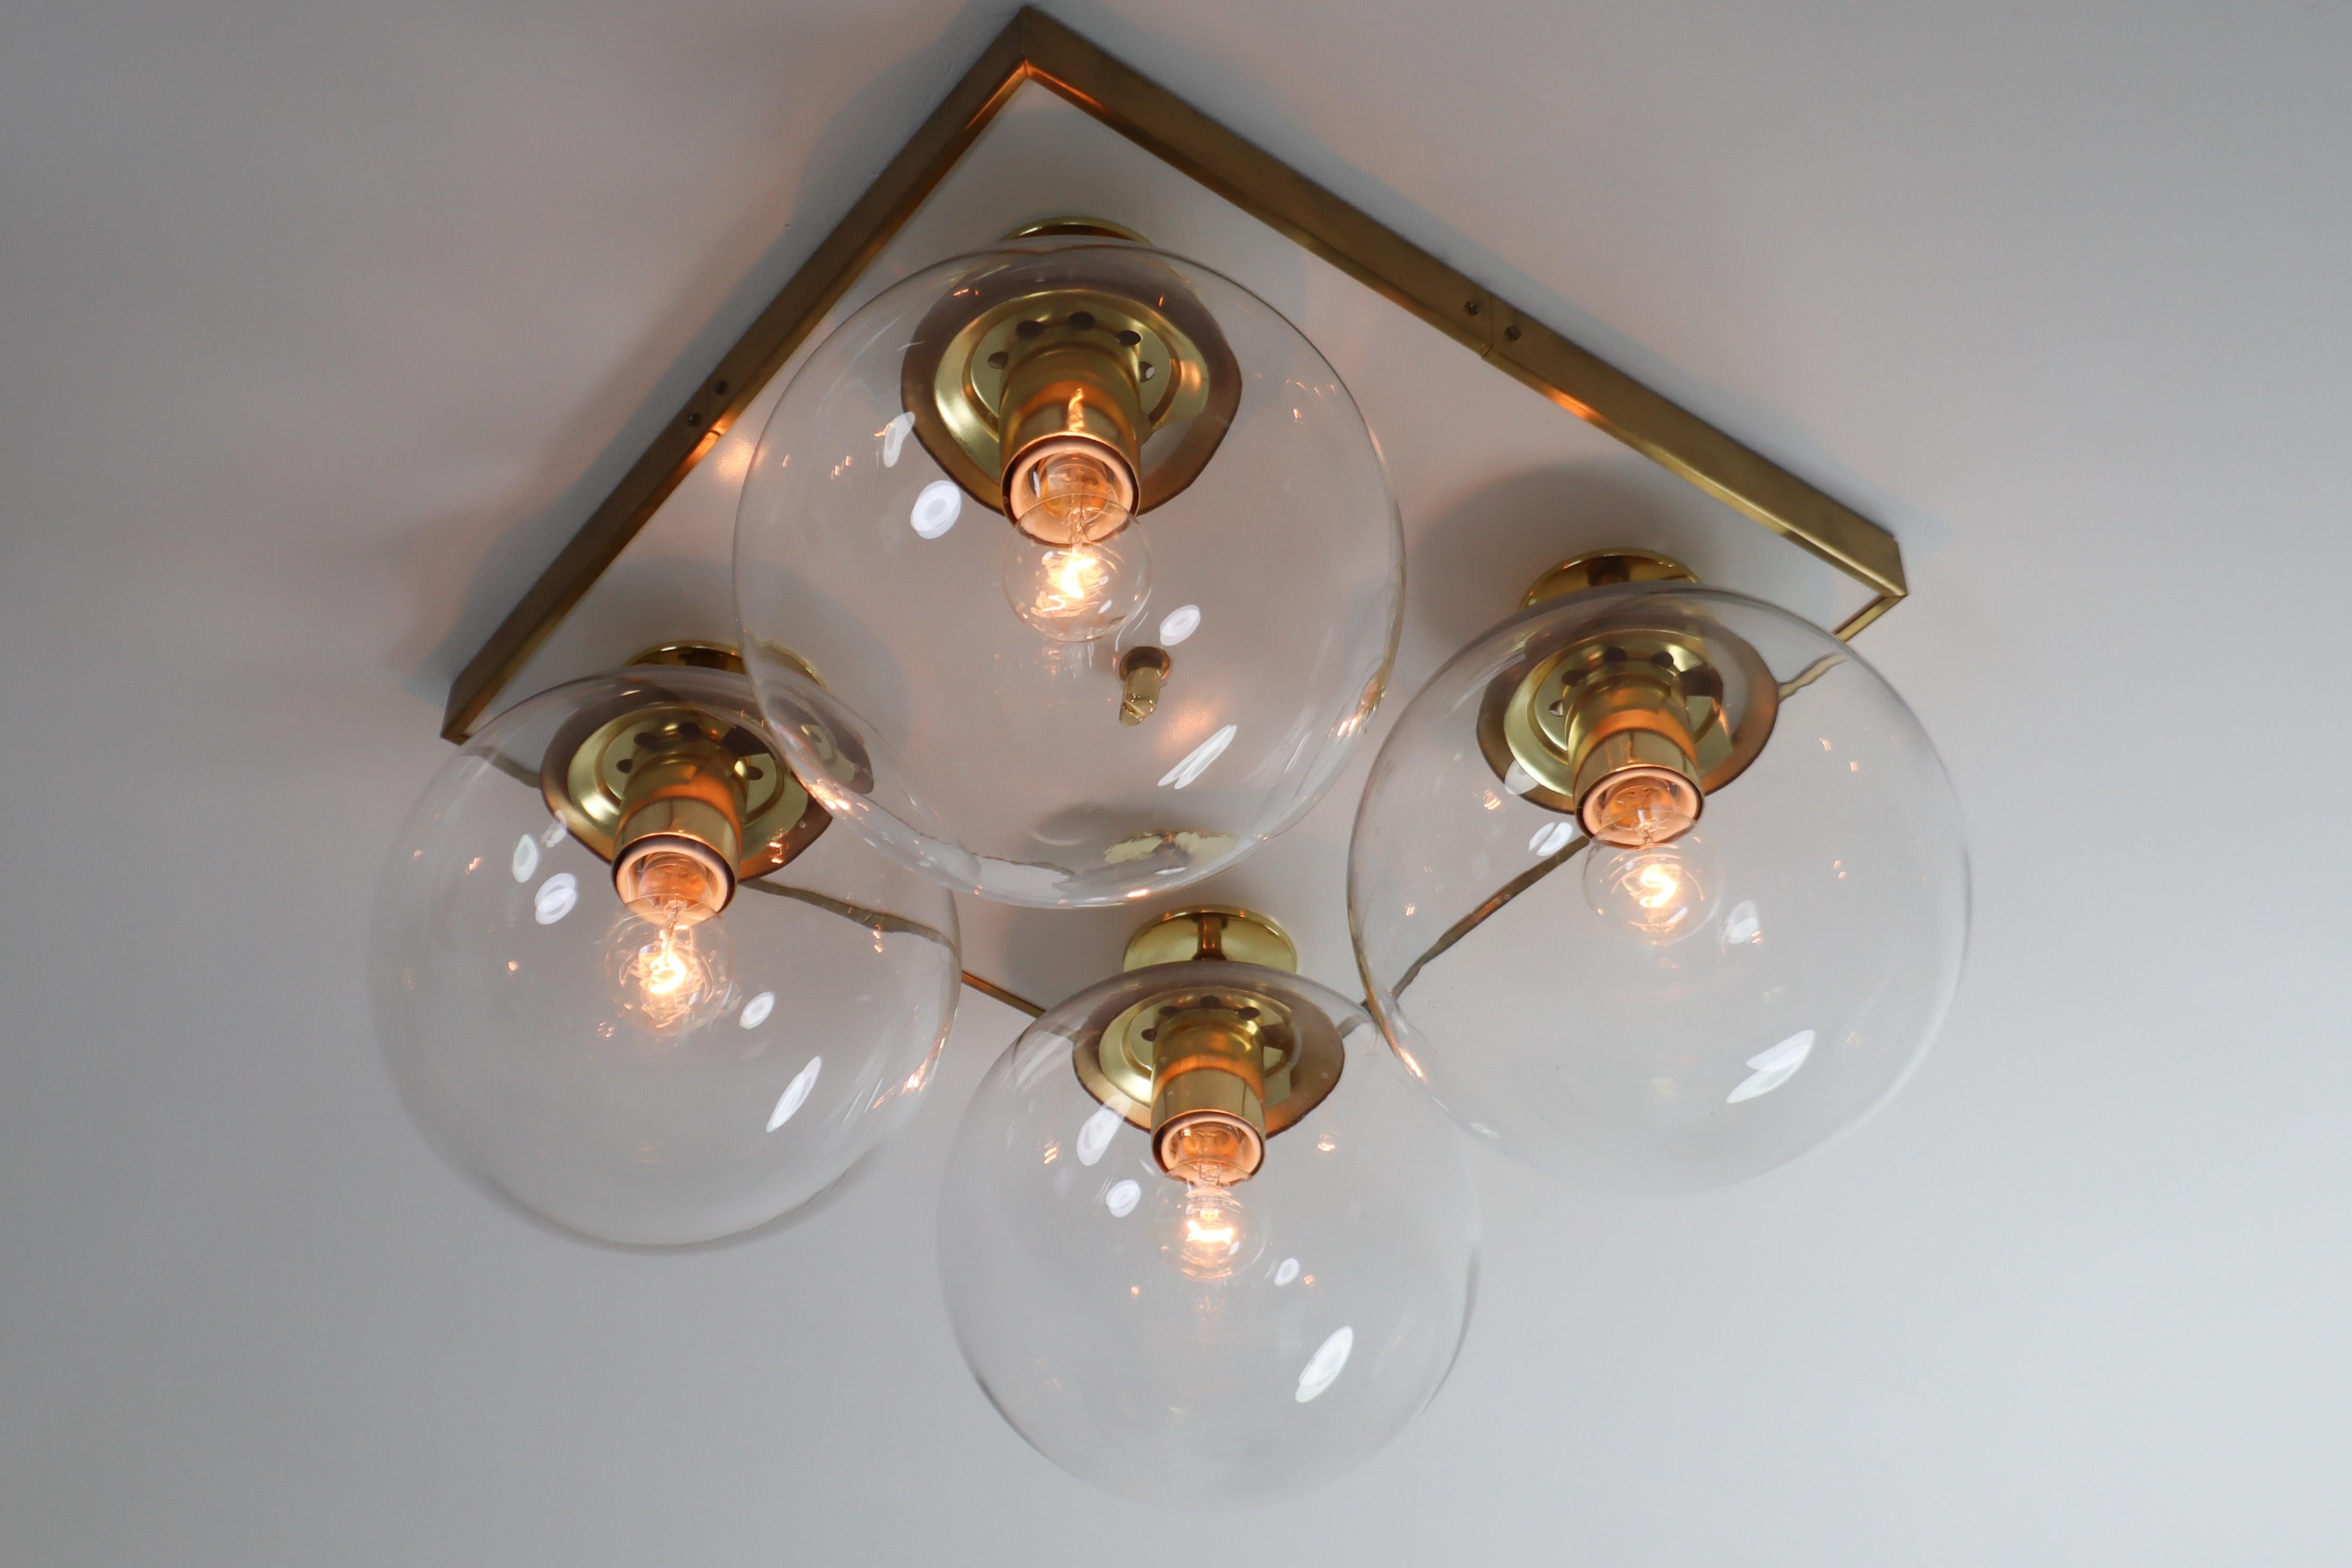 Midcentury ceiling brass chandeliers, flushmounts by designer and manufacturer Preciosa and produced in Czech Republic the early 1970s. Beautiful work with four transparent blown spheres by a brass structure. The light created by these chandeliers